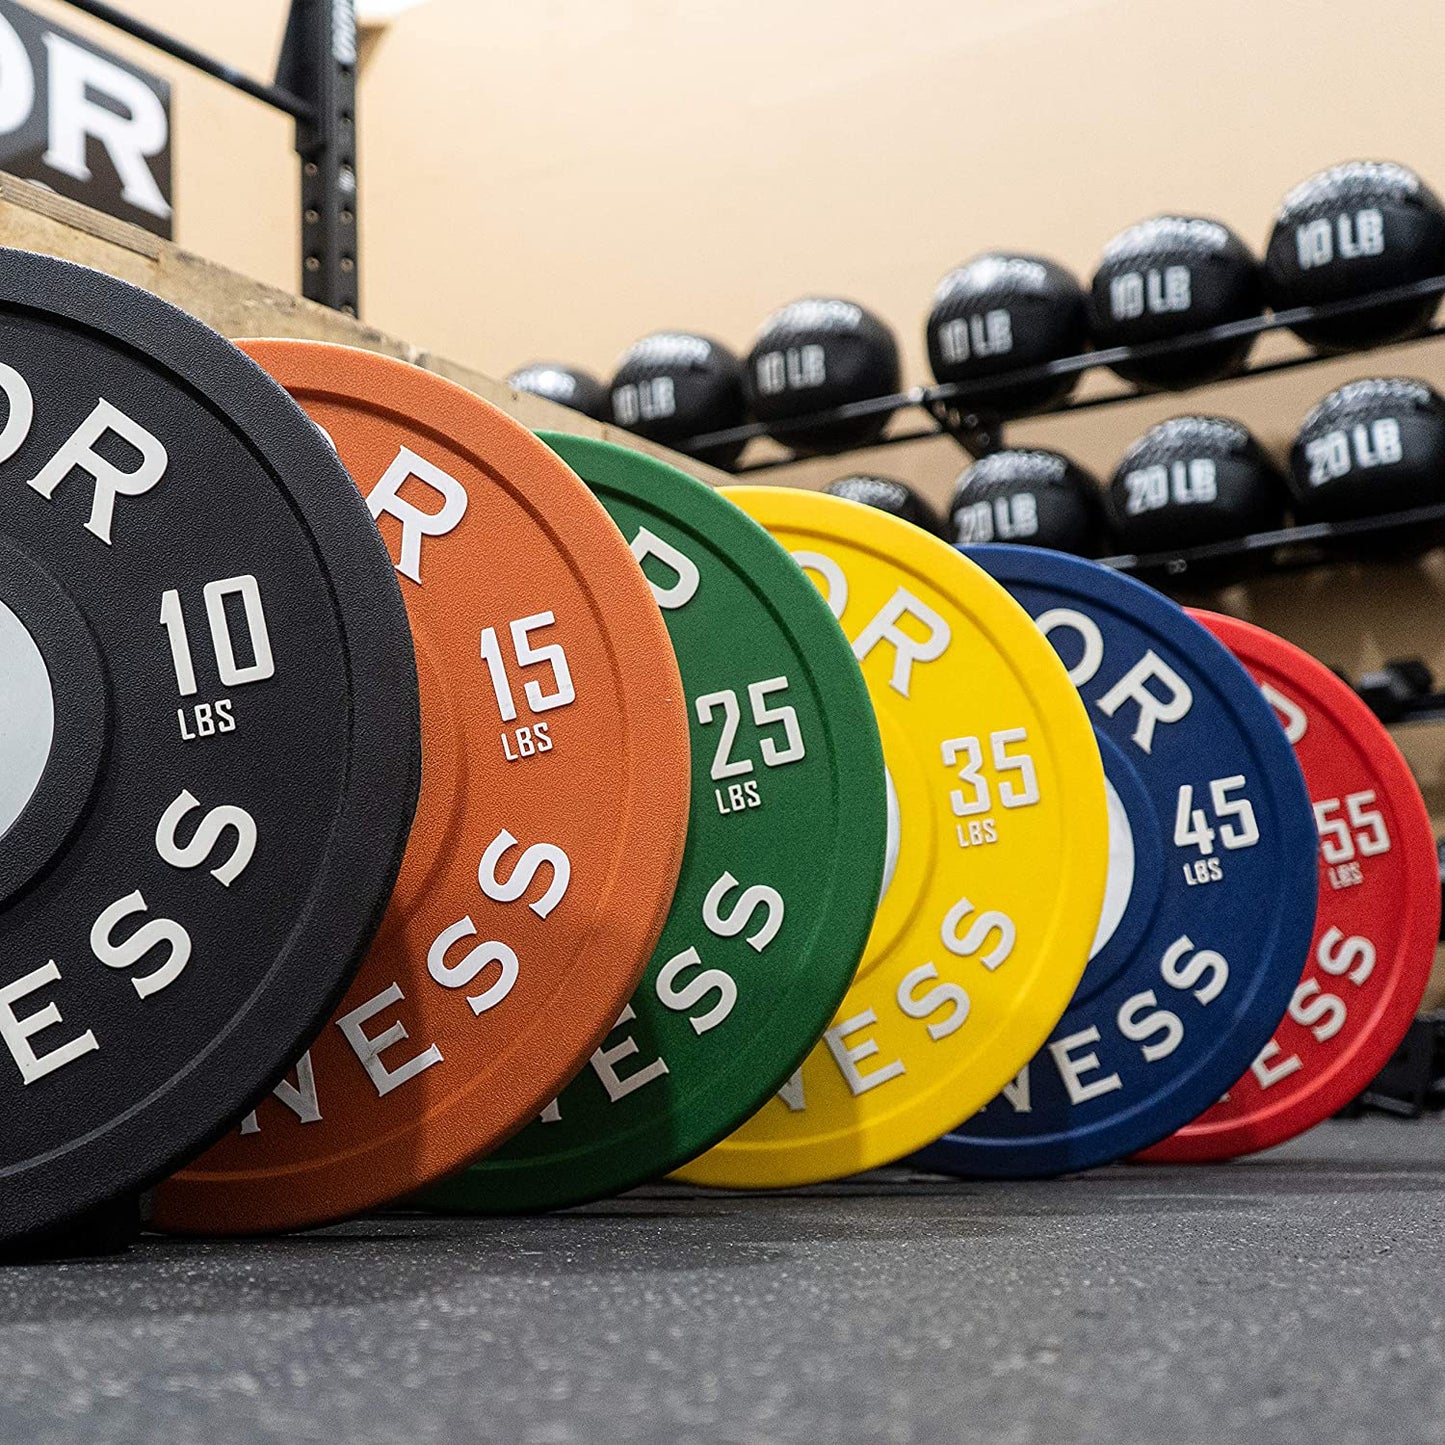 BPPU Poly Urethane Bumper Plates for Cross Training, Olympic Weight Lifting, and Power Lifting - Color Coded, Multiple Weight Plates Options Available